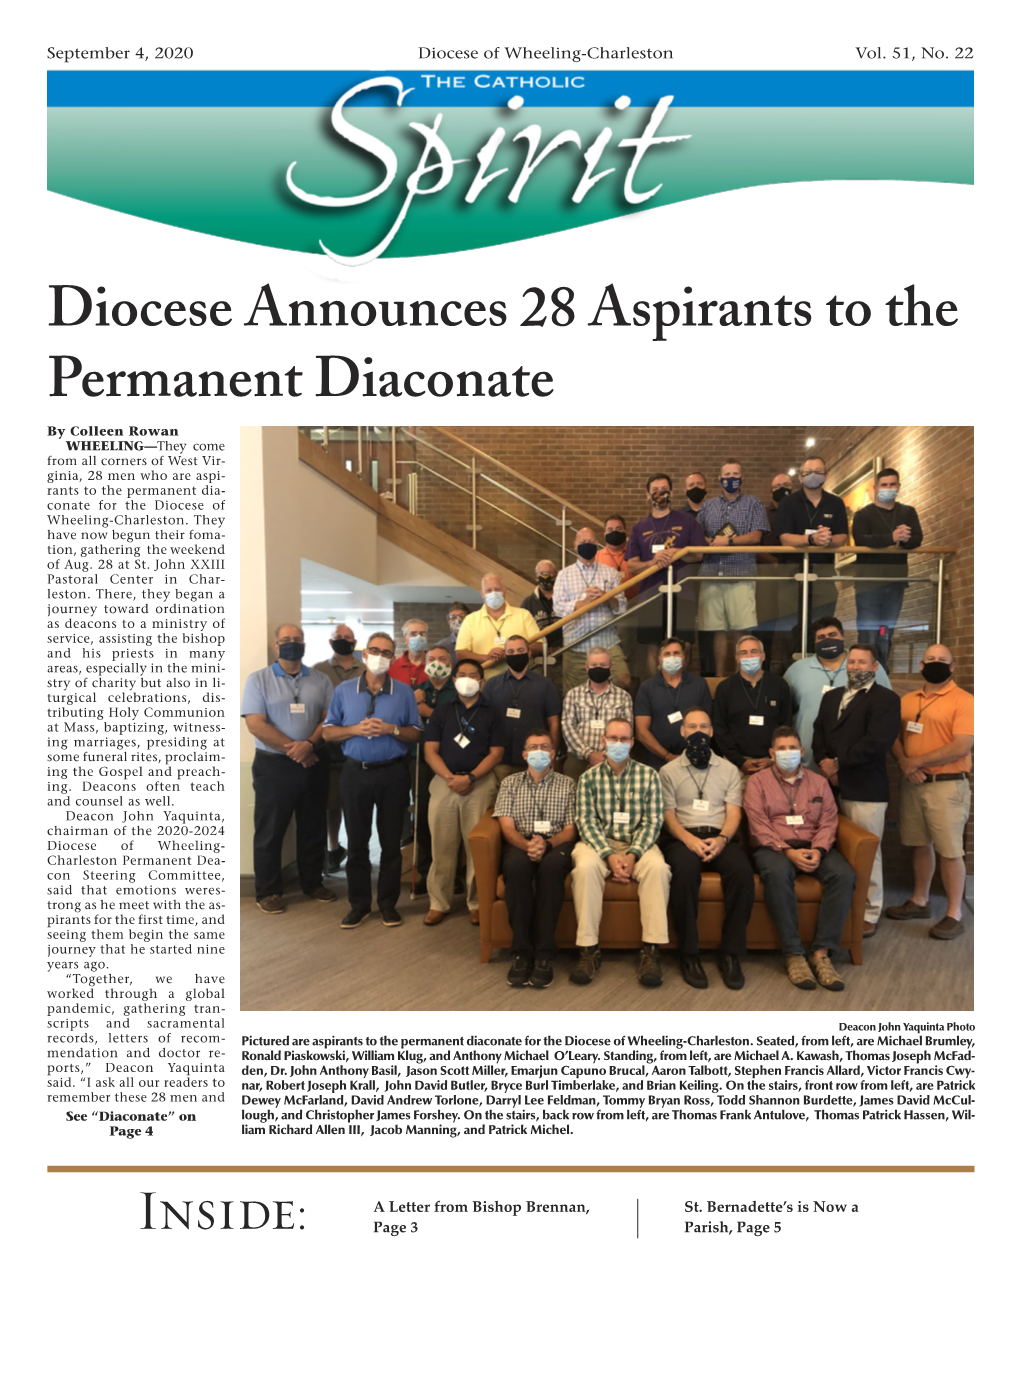 Diocese Announces 28 Aspirants to the Permanent Diaconate